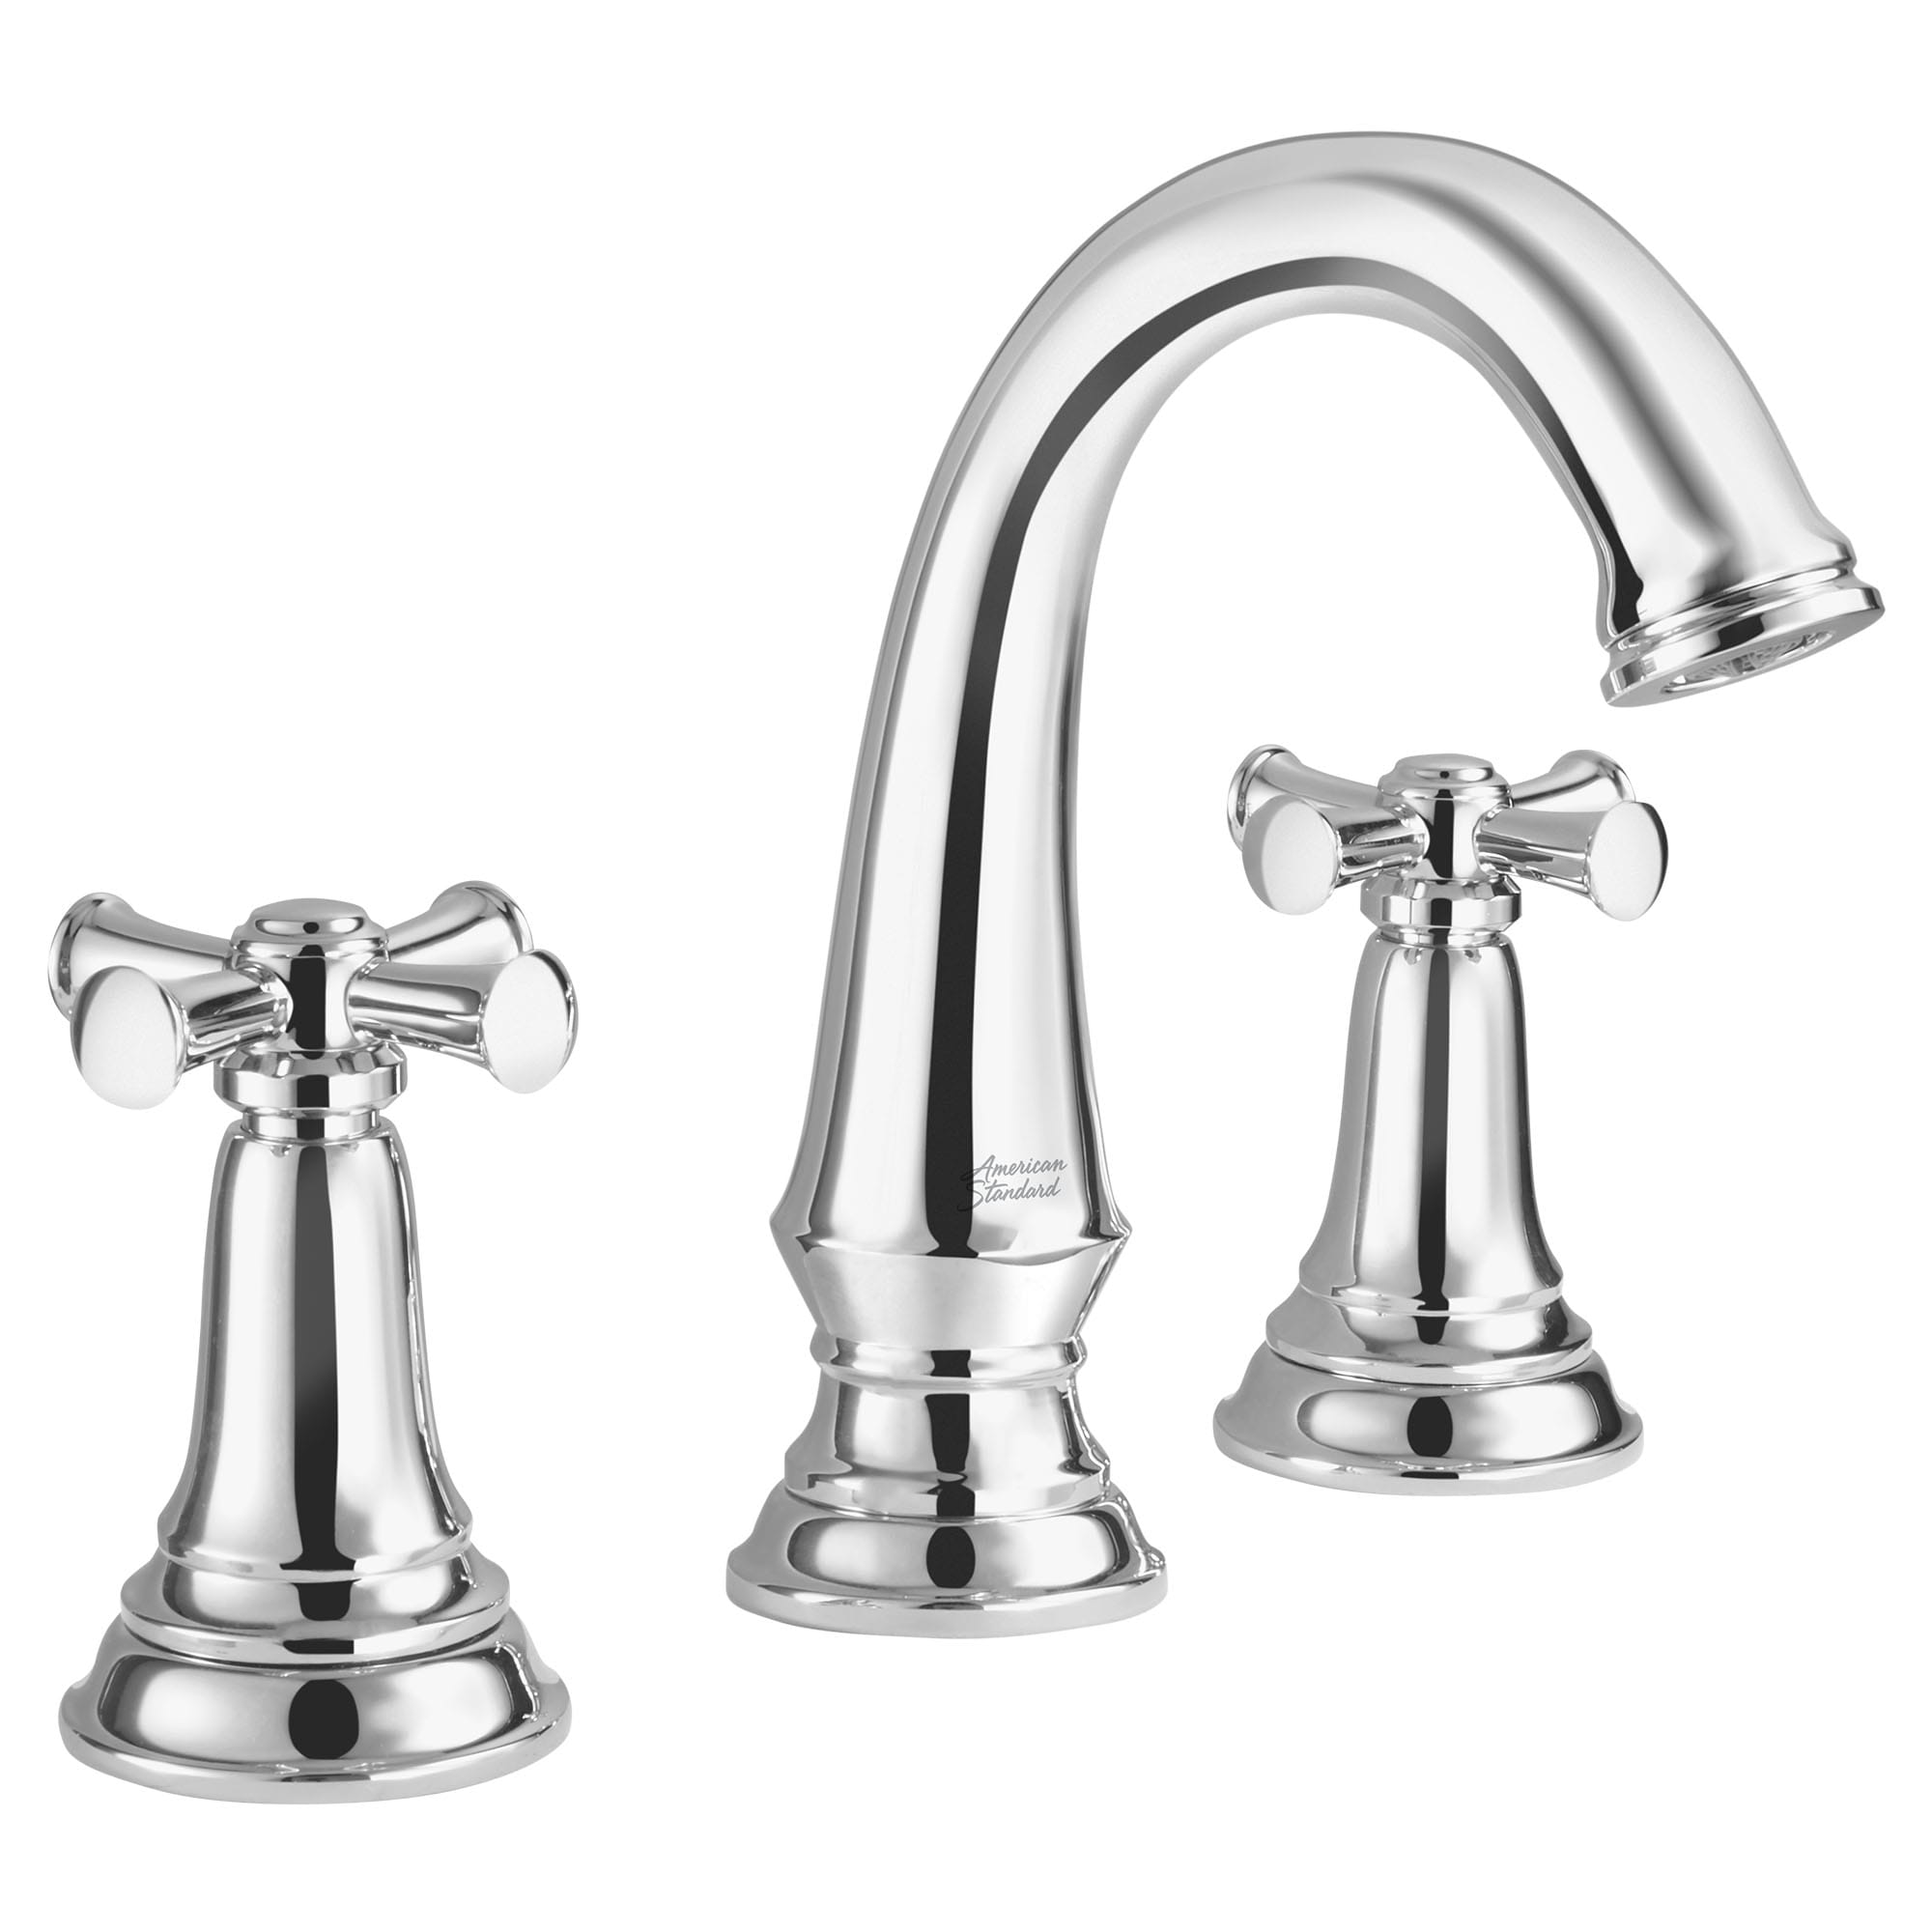 Delancey 8 Inch Widespread 2 Handle Bathroom Faucet 12 gpm 45 L min With Cross Handles CHROME